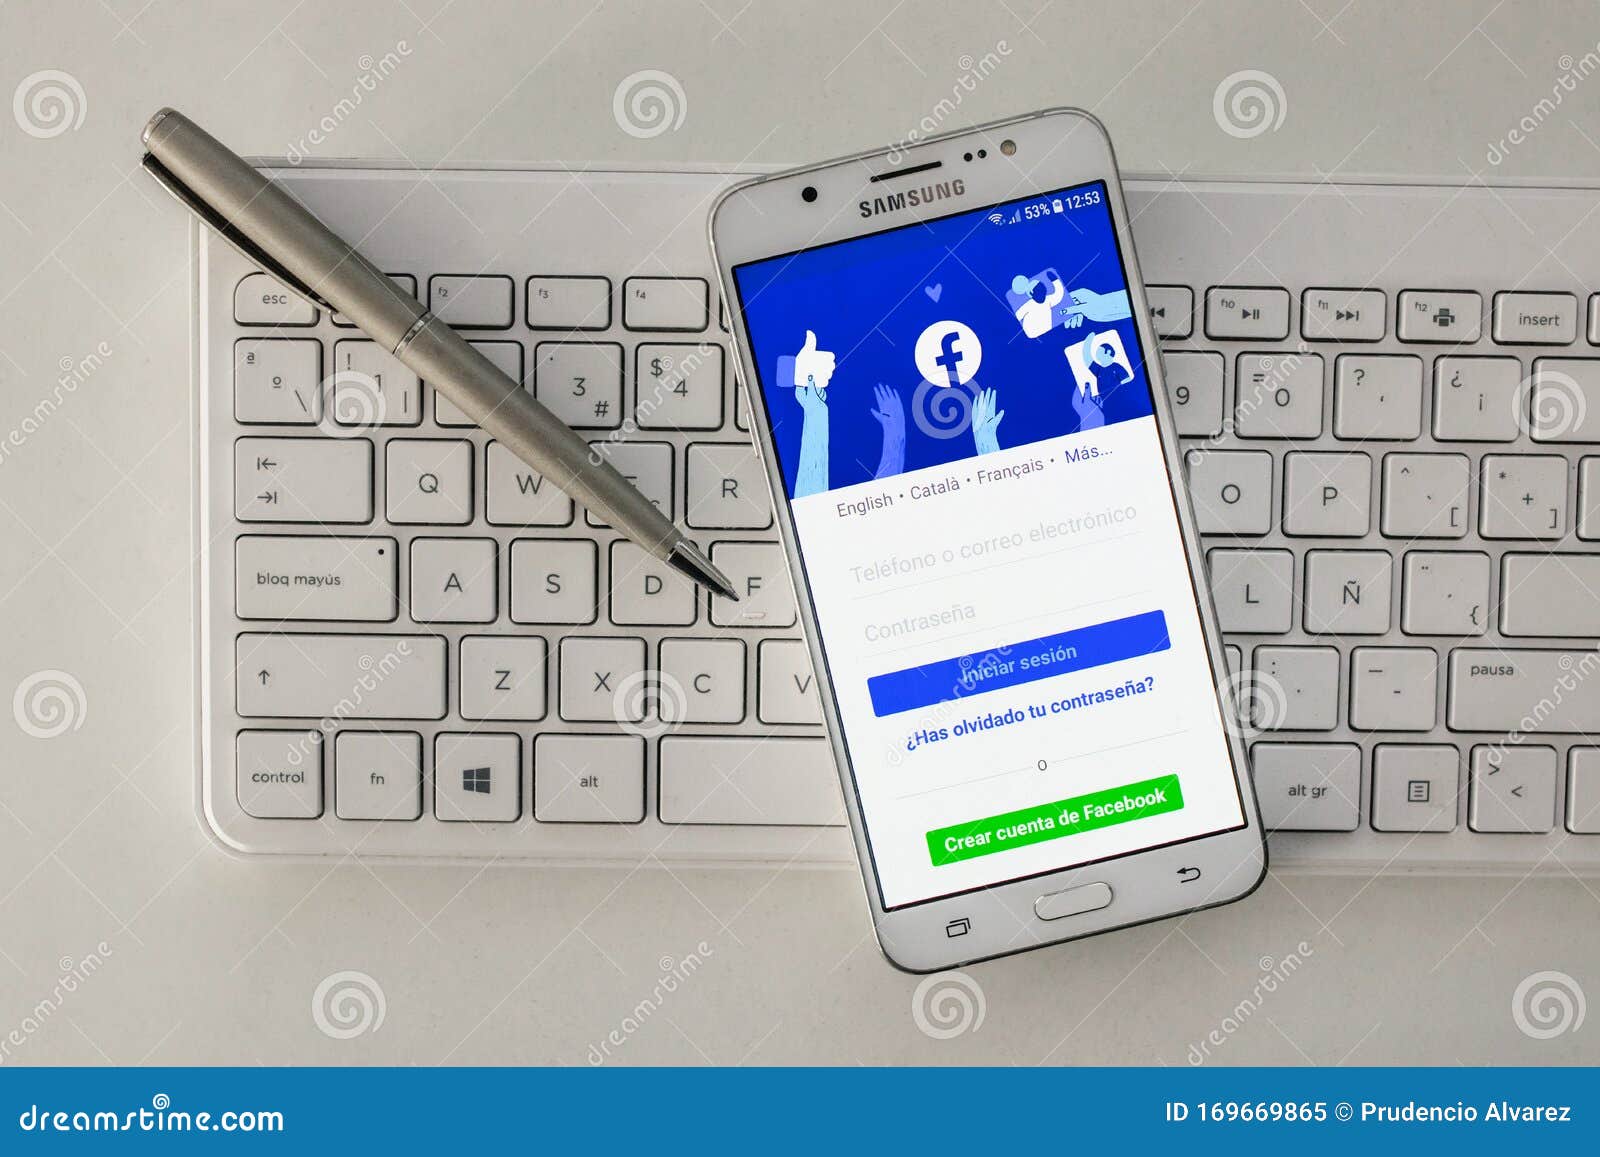 Samsung Phone Screen With Facebook Application On Android System